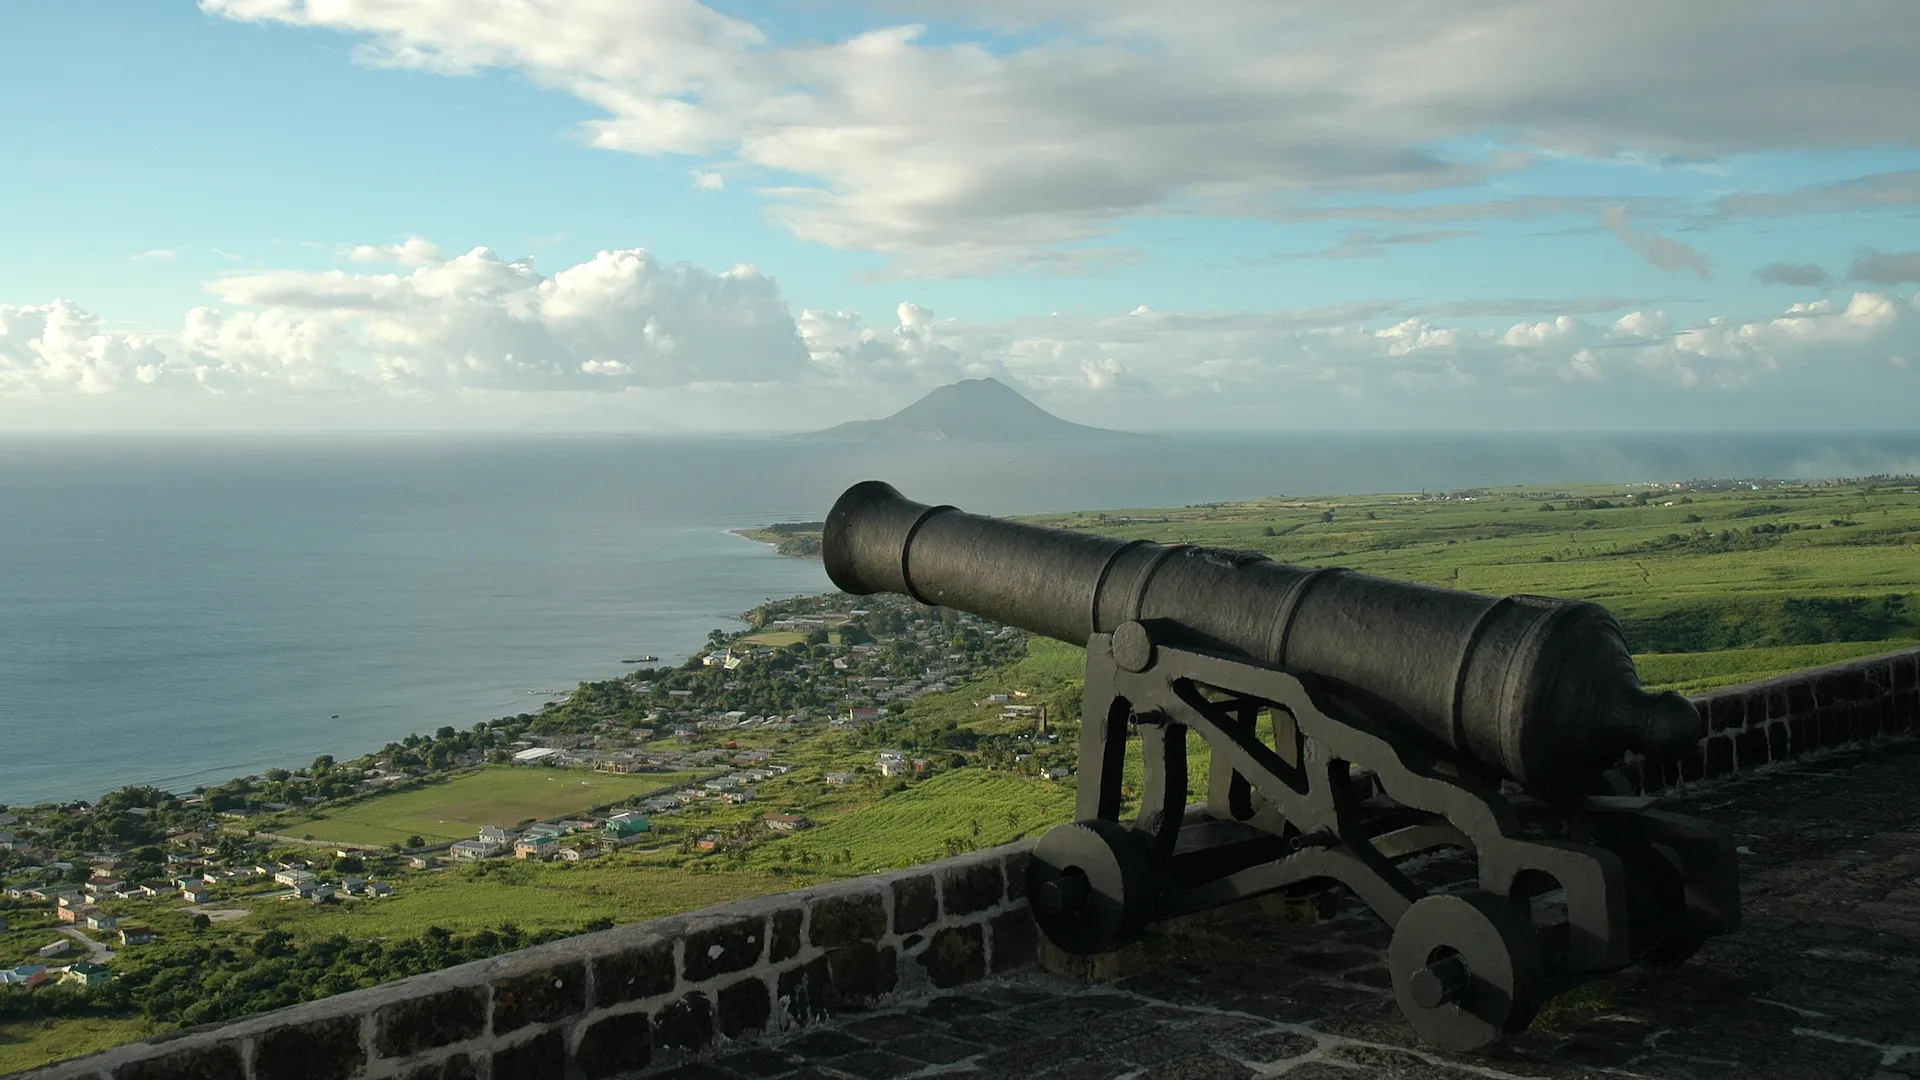 Saint Kitts and Nevis: Gained independence from the United Kingdom on September 19, 1983. 1920x1080 Full HD Wallpaper.